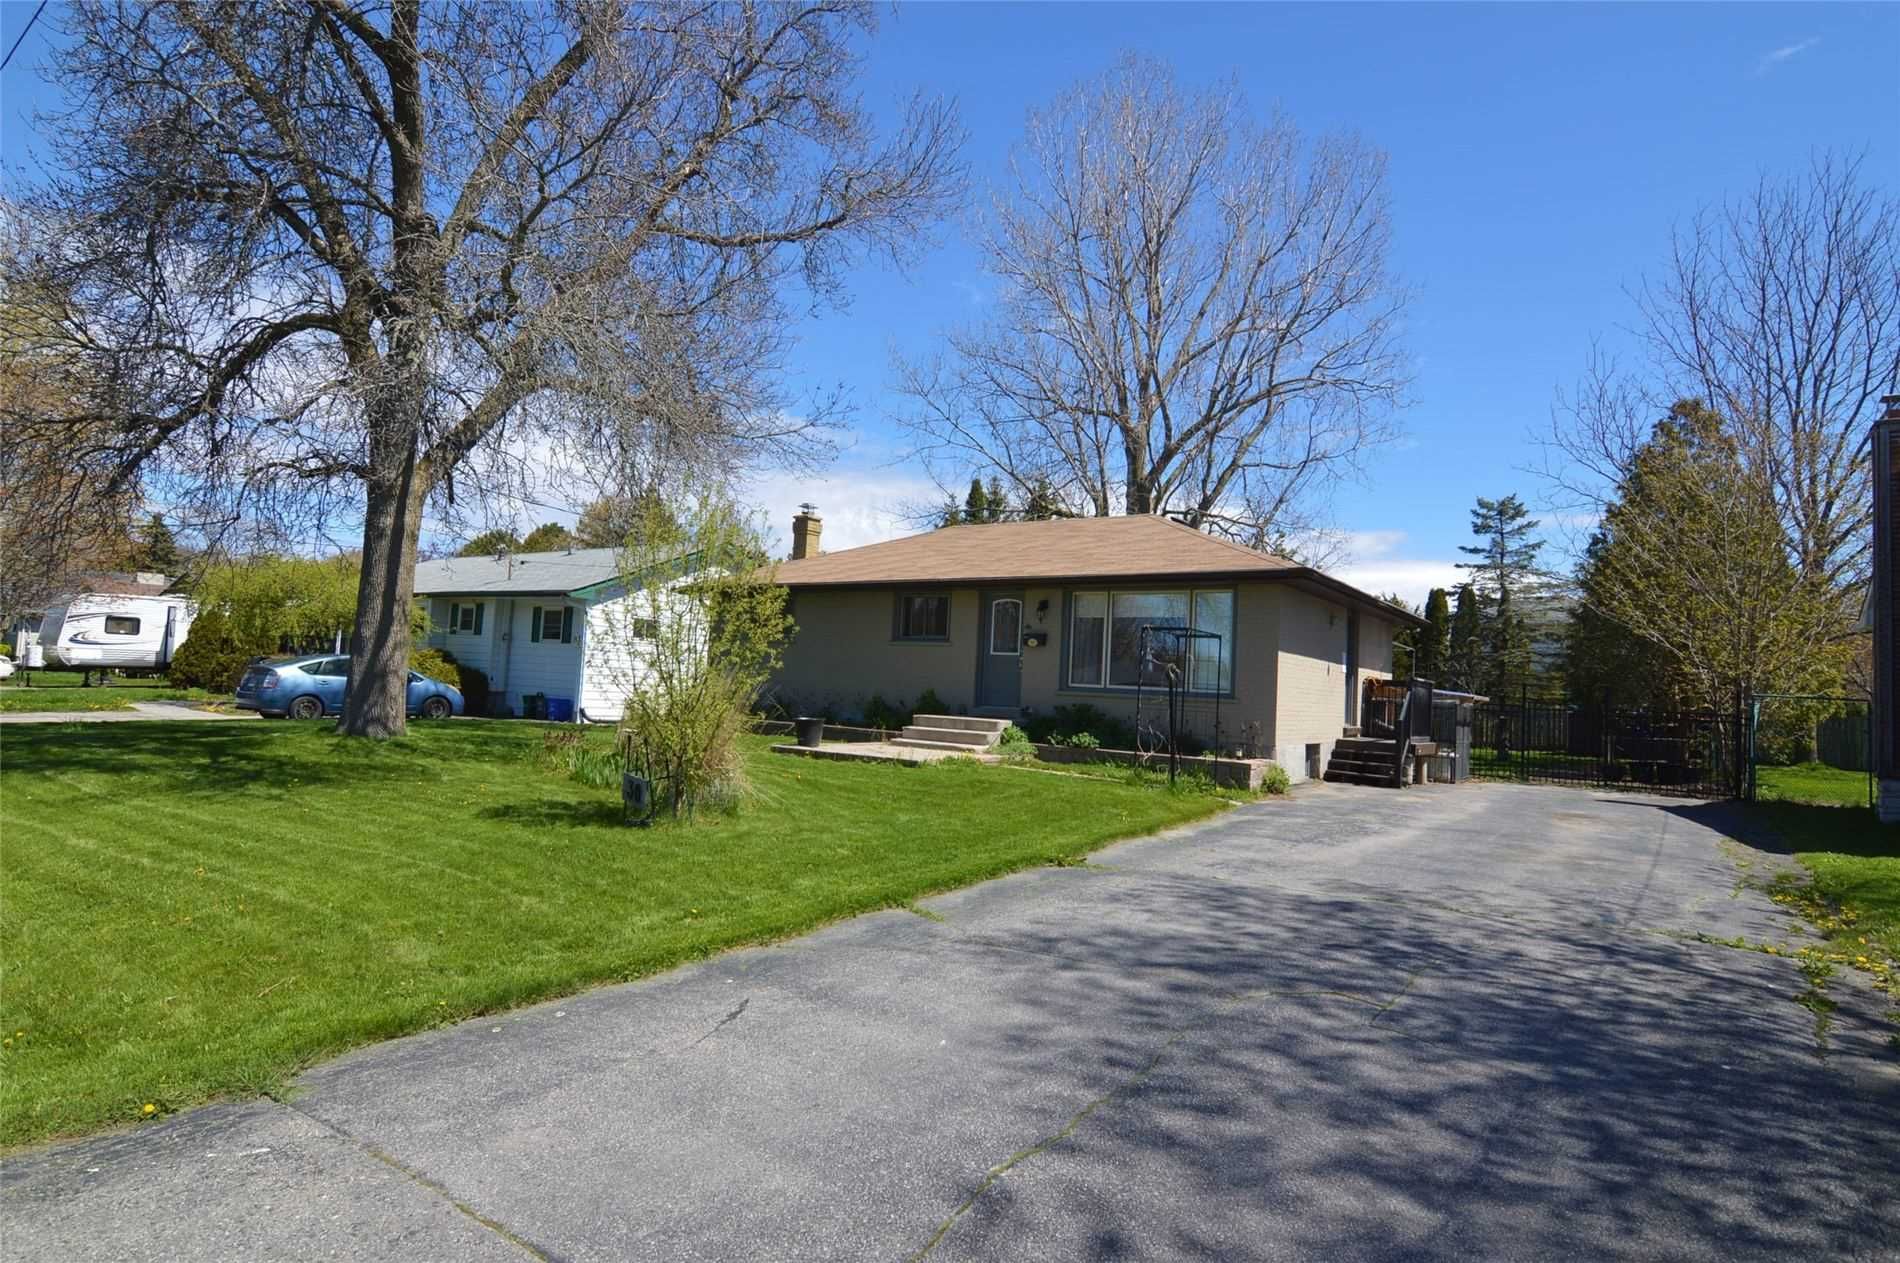 New property listed in Cobourg, Cobourg